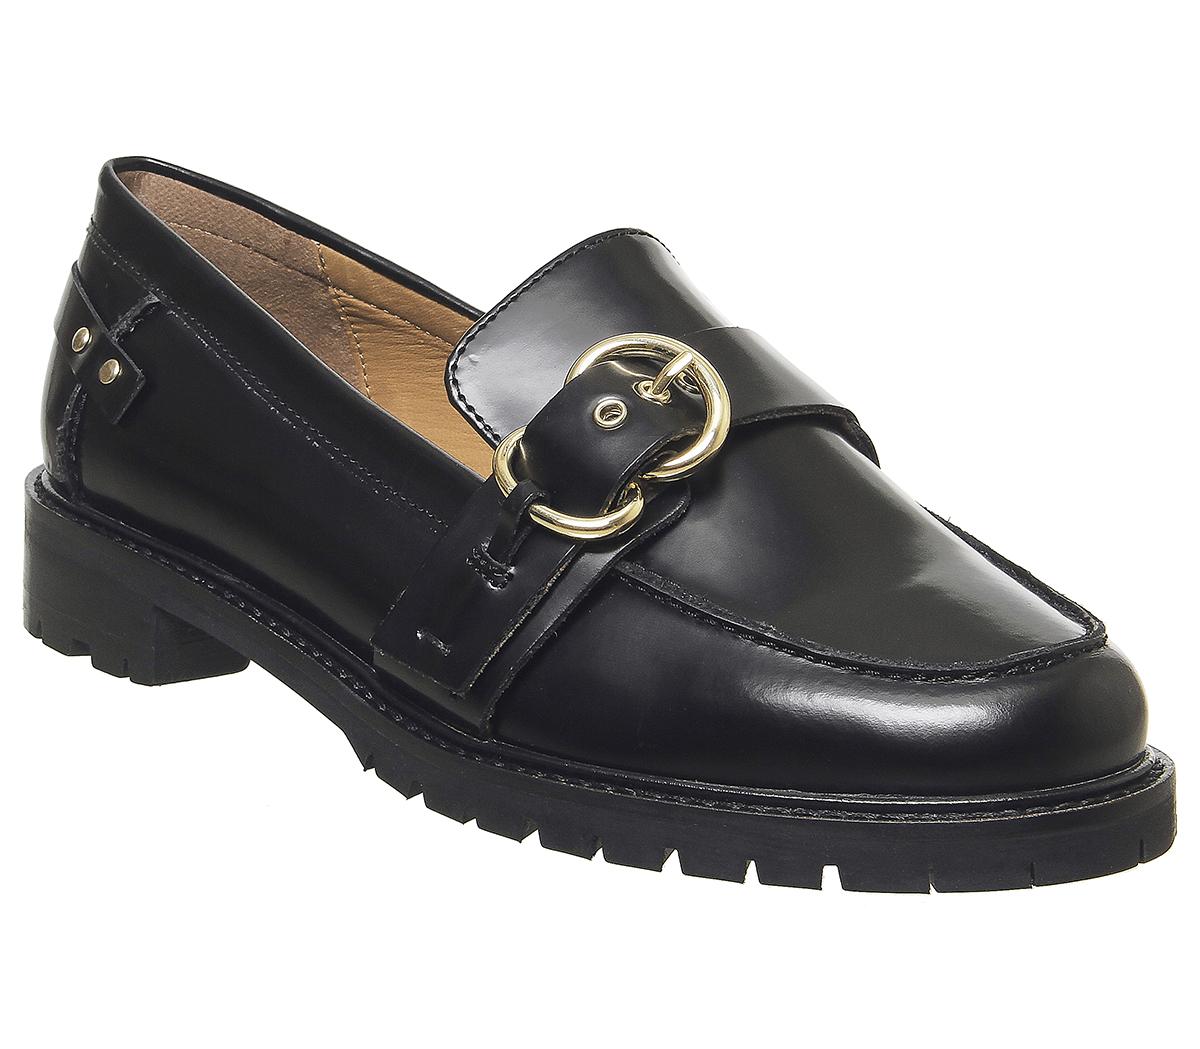 OFFICE Fallow Buckle Loafers Black Box Leather - Flat Shoes for Women